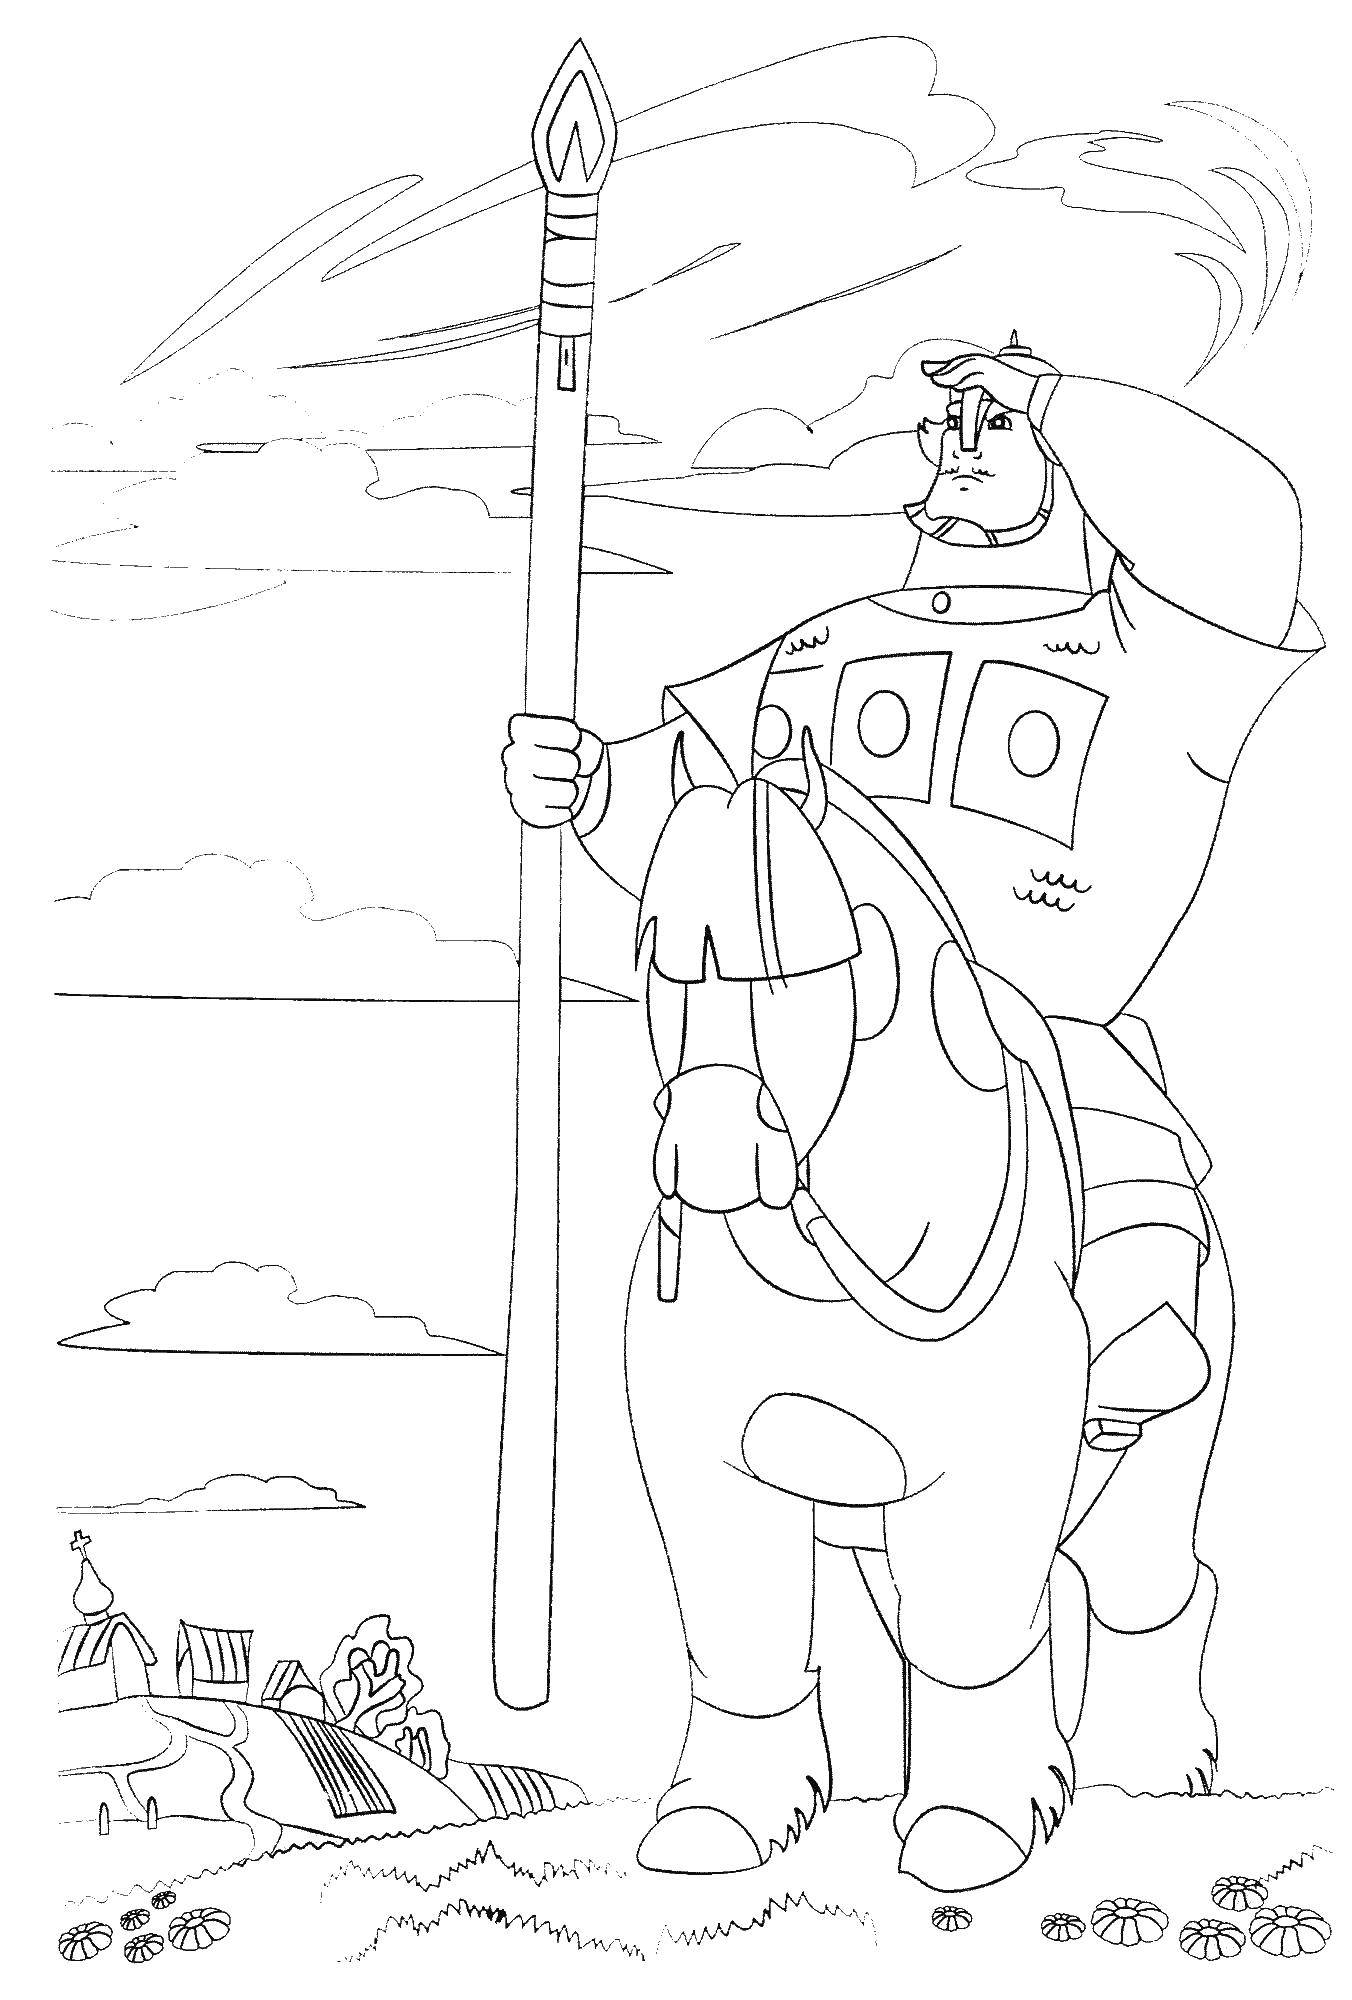 Coloring Nikitich on horseback. Category cartoons. Tags:  Dobrynya Nikitich, the horse.